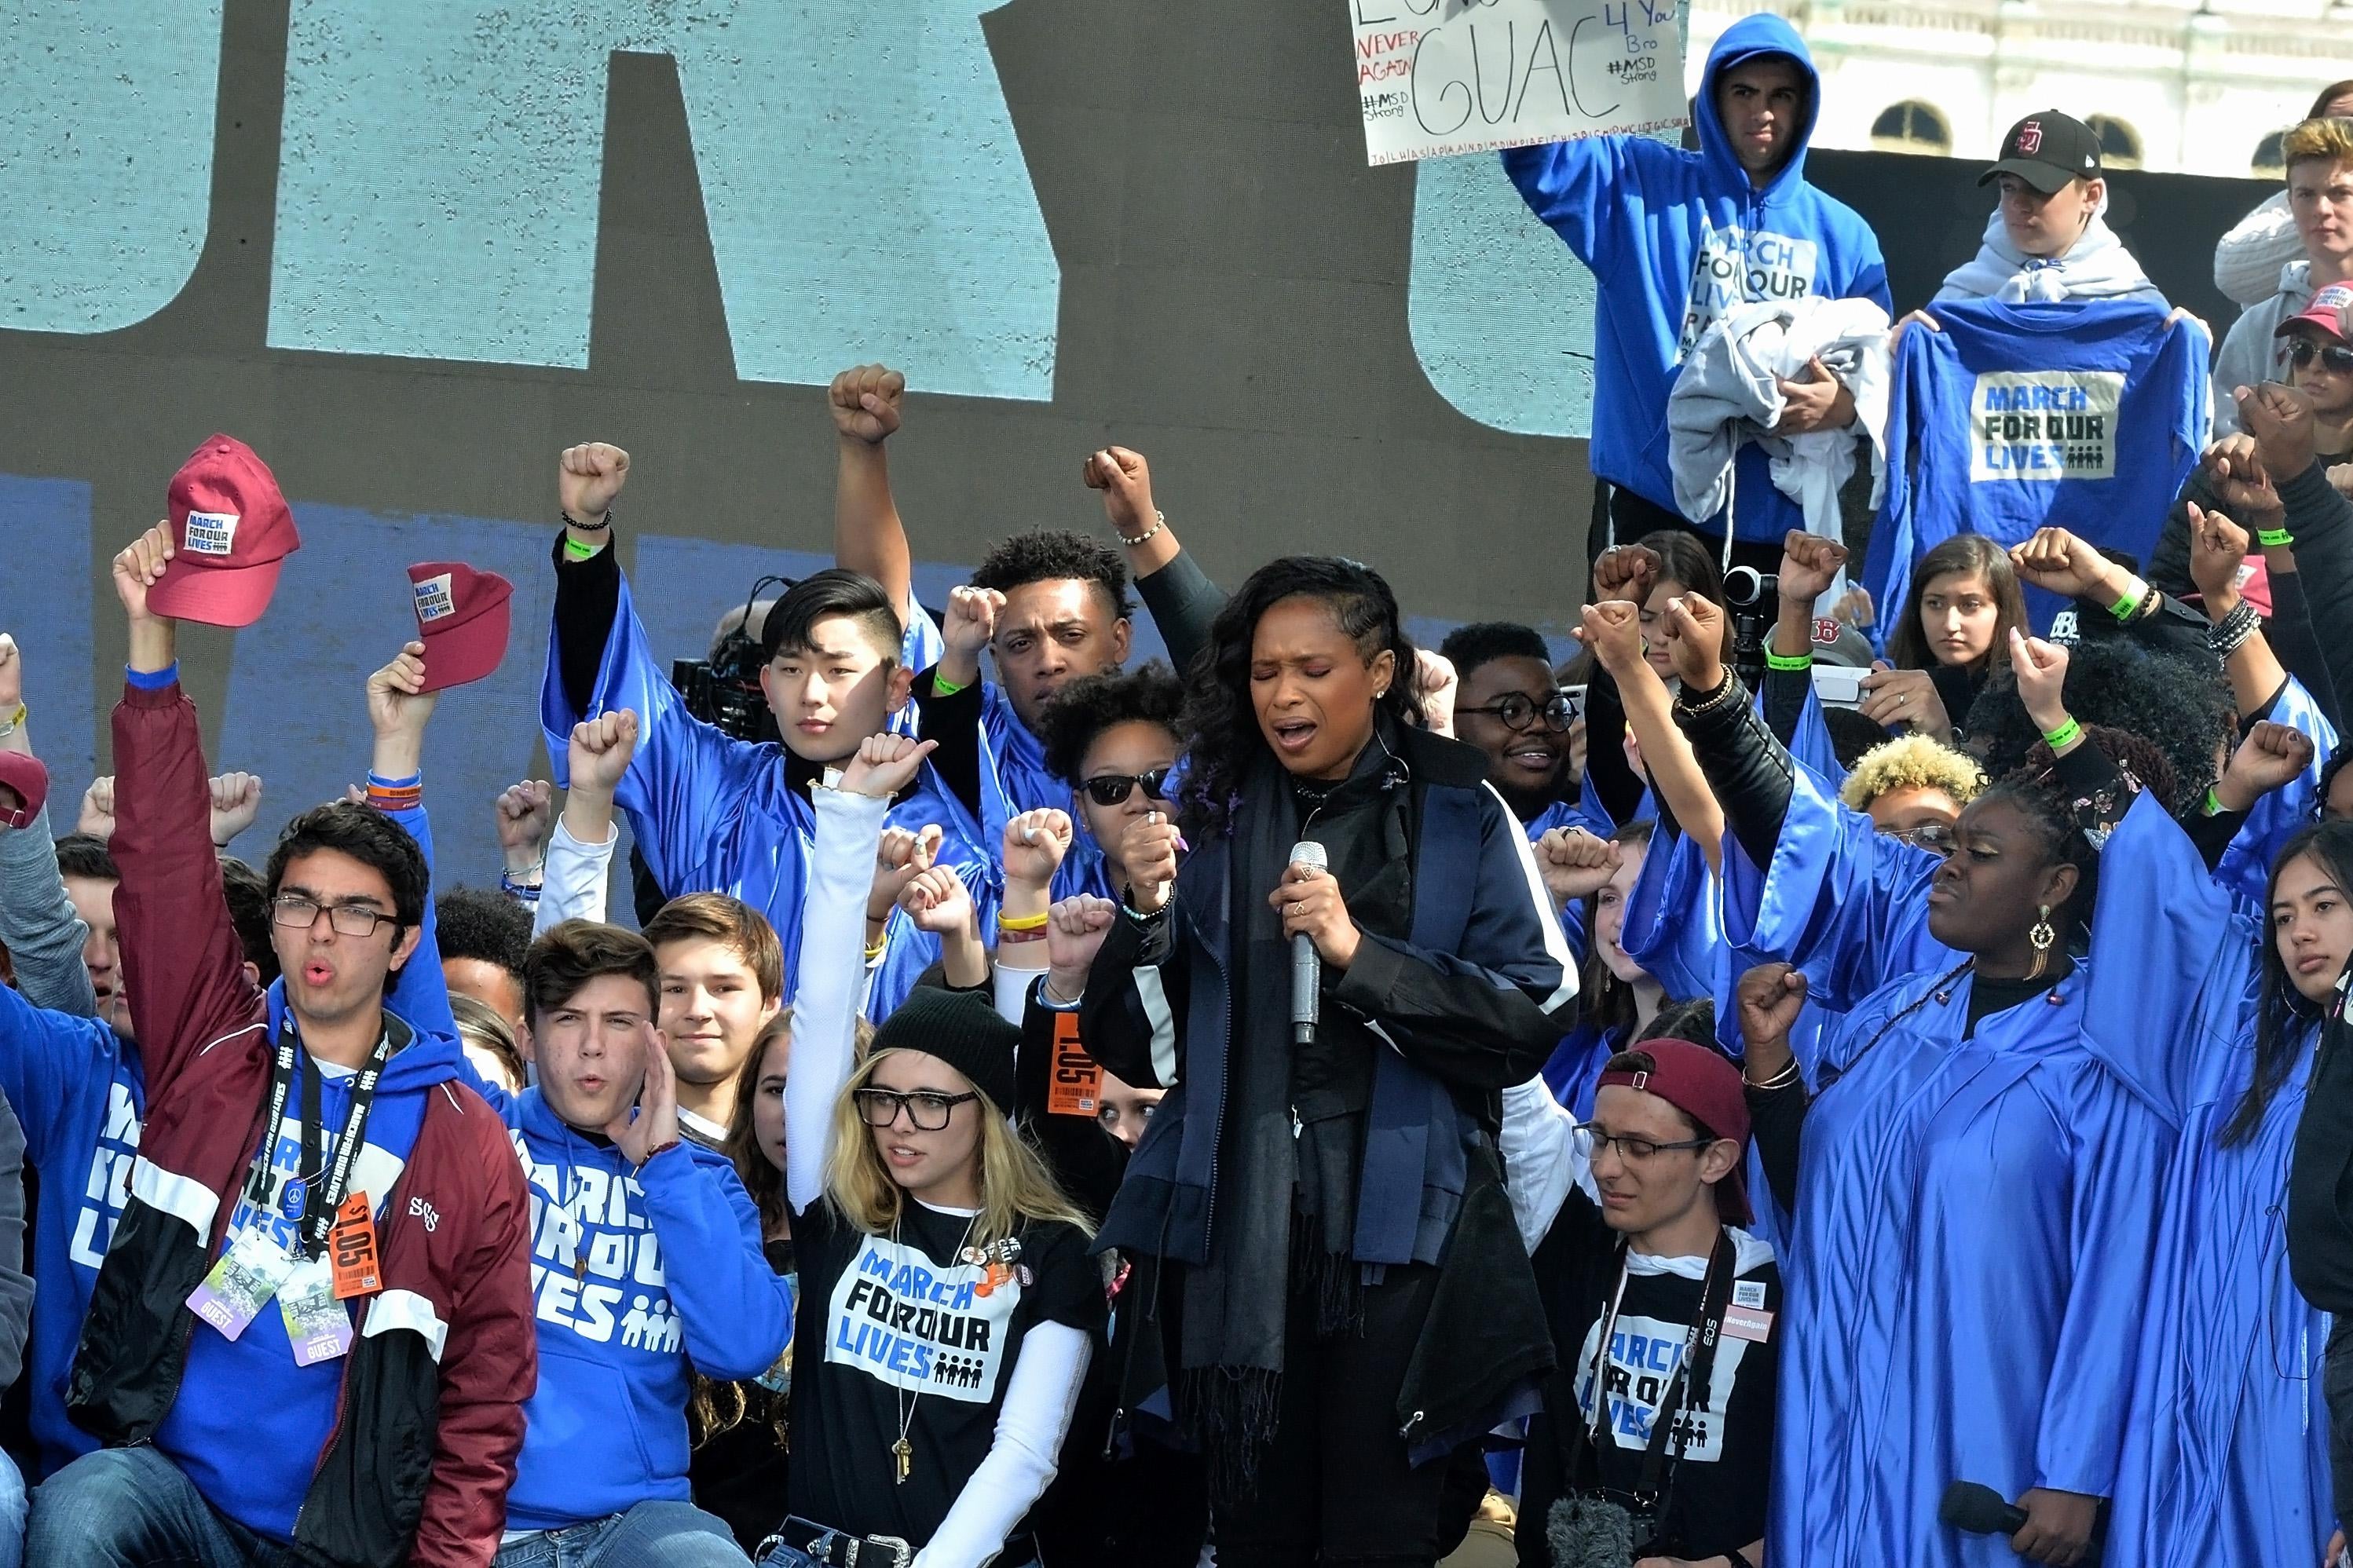 WASHINGTON, DC - MARCH 24:  Jennifer Hudson sings at the March for Our Lives Rally on March 24, 2018 in Washington, DC.  (Photo by Shannon Finney/Getty Images)